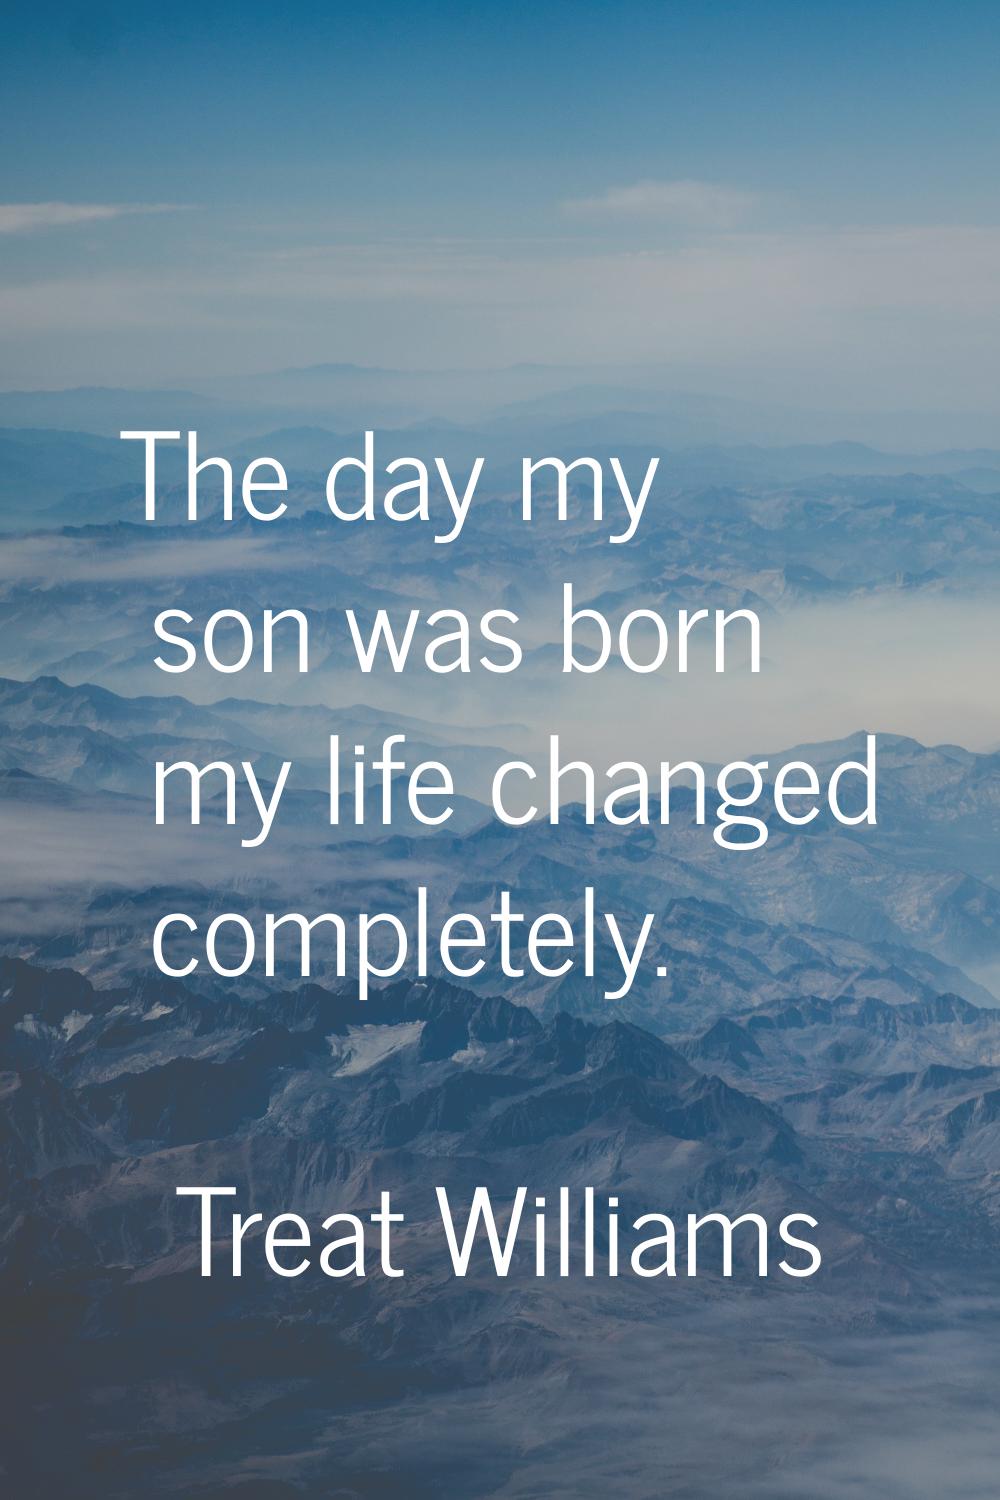 The day my son was born my life changed completely.